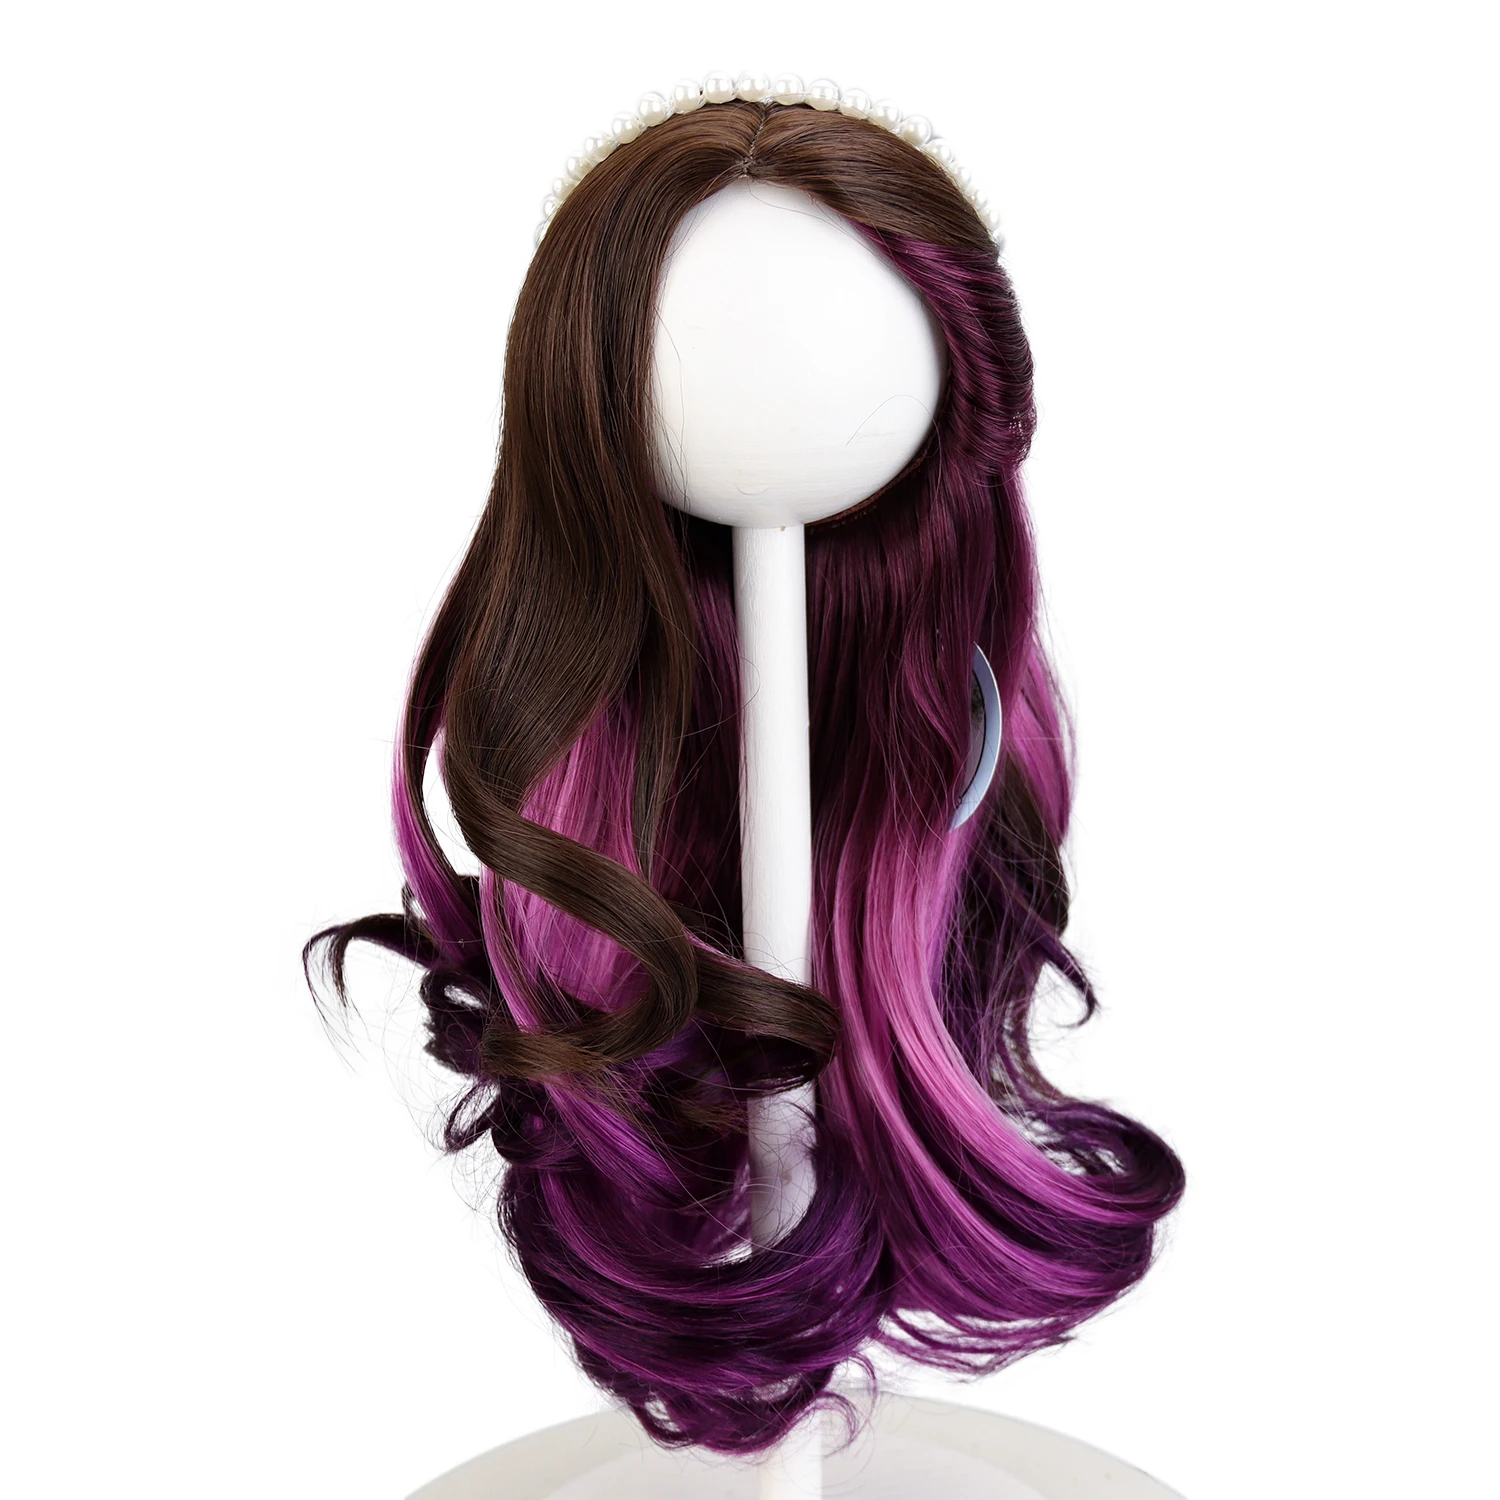 Beautiful Doll Wigs Long Curly Fit for 26-29cm Head 18 Inch American Doll Tress Hair